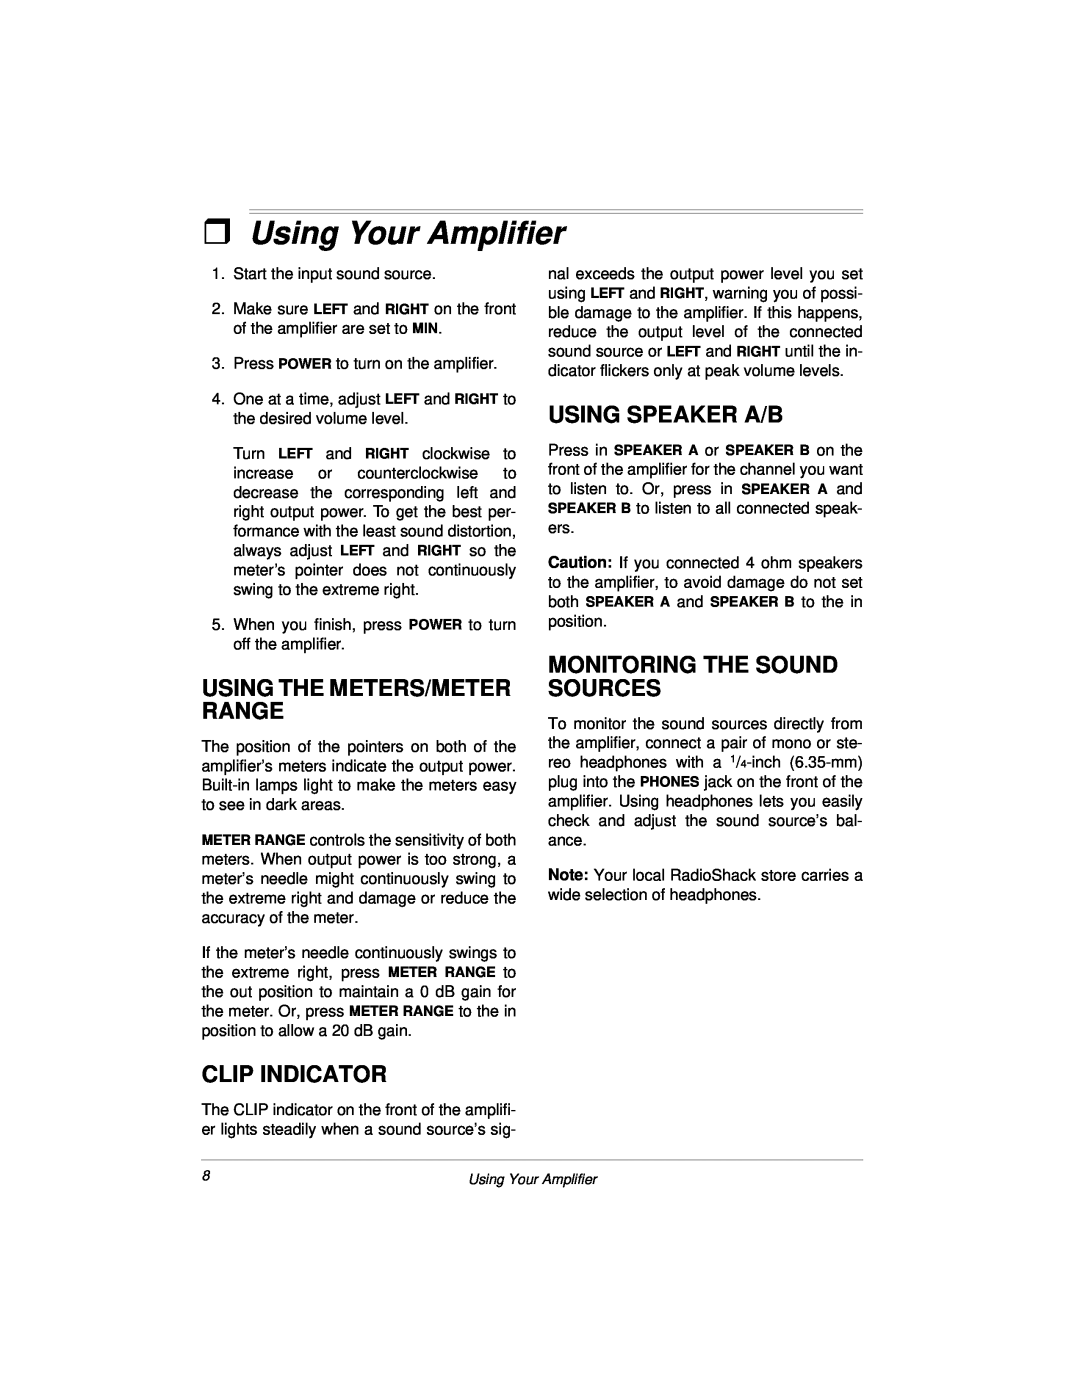 Radio Shack 04A00, 32-2004 owner manual ˆUsing Your Amplifier, Using The Meters/Meter Range, Clip Indicator 